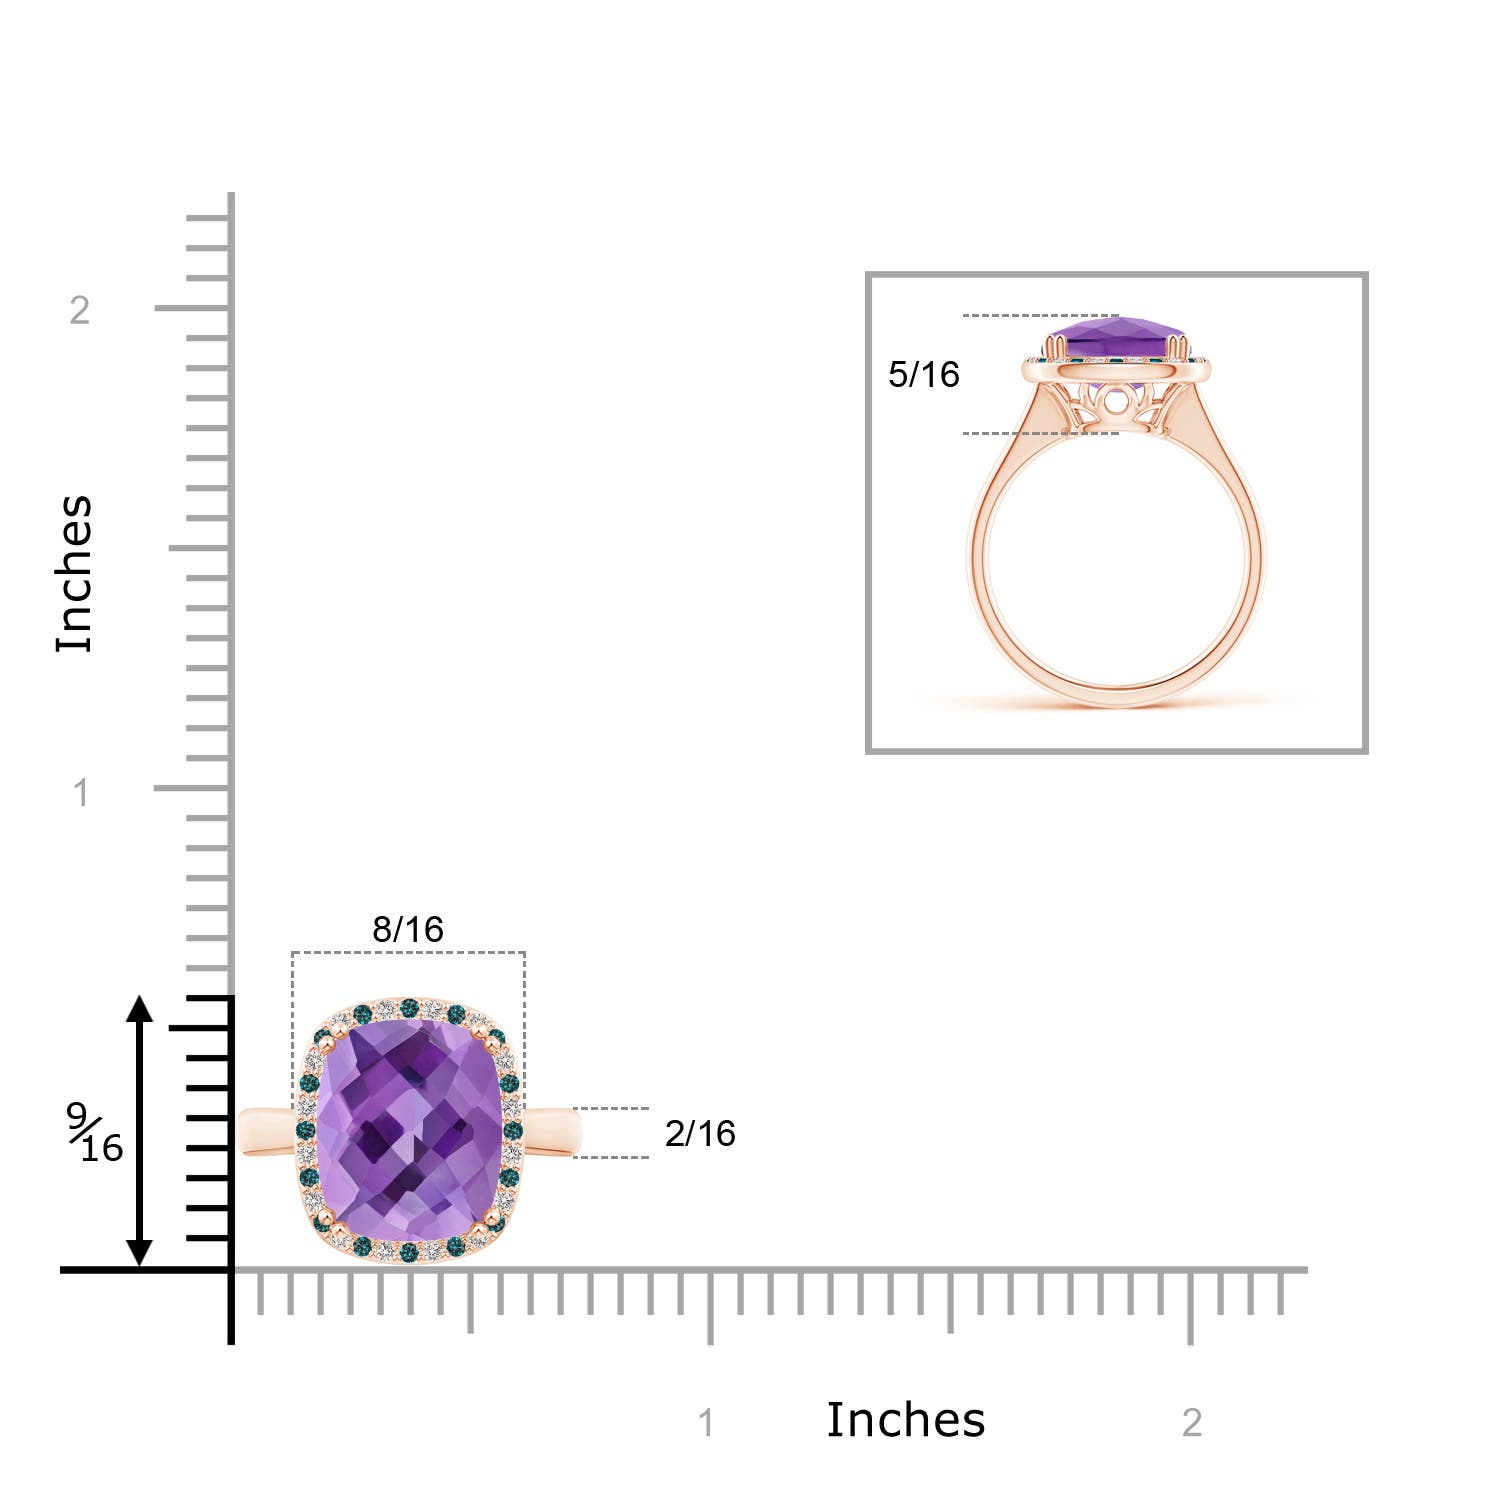 AA - Amethyst / 4.59 CT / 14 KT Rose Gold